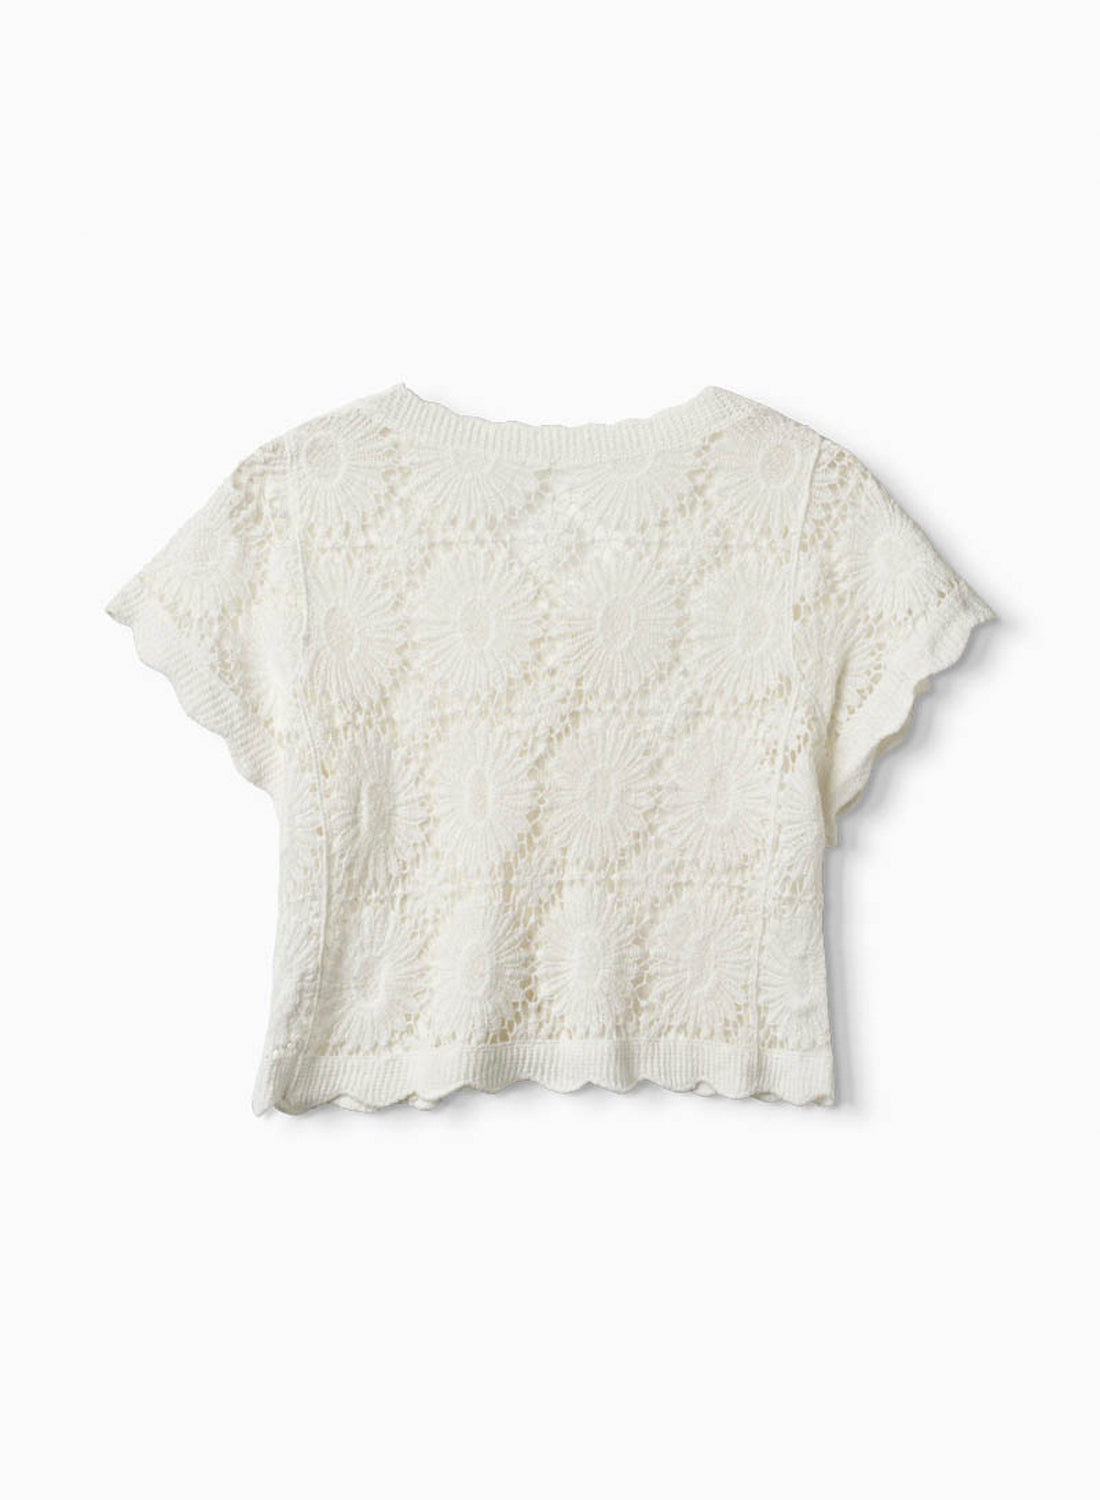 The Collection Crochet Top White